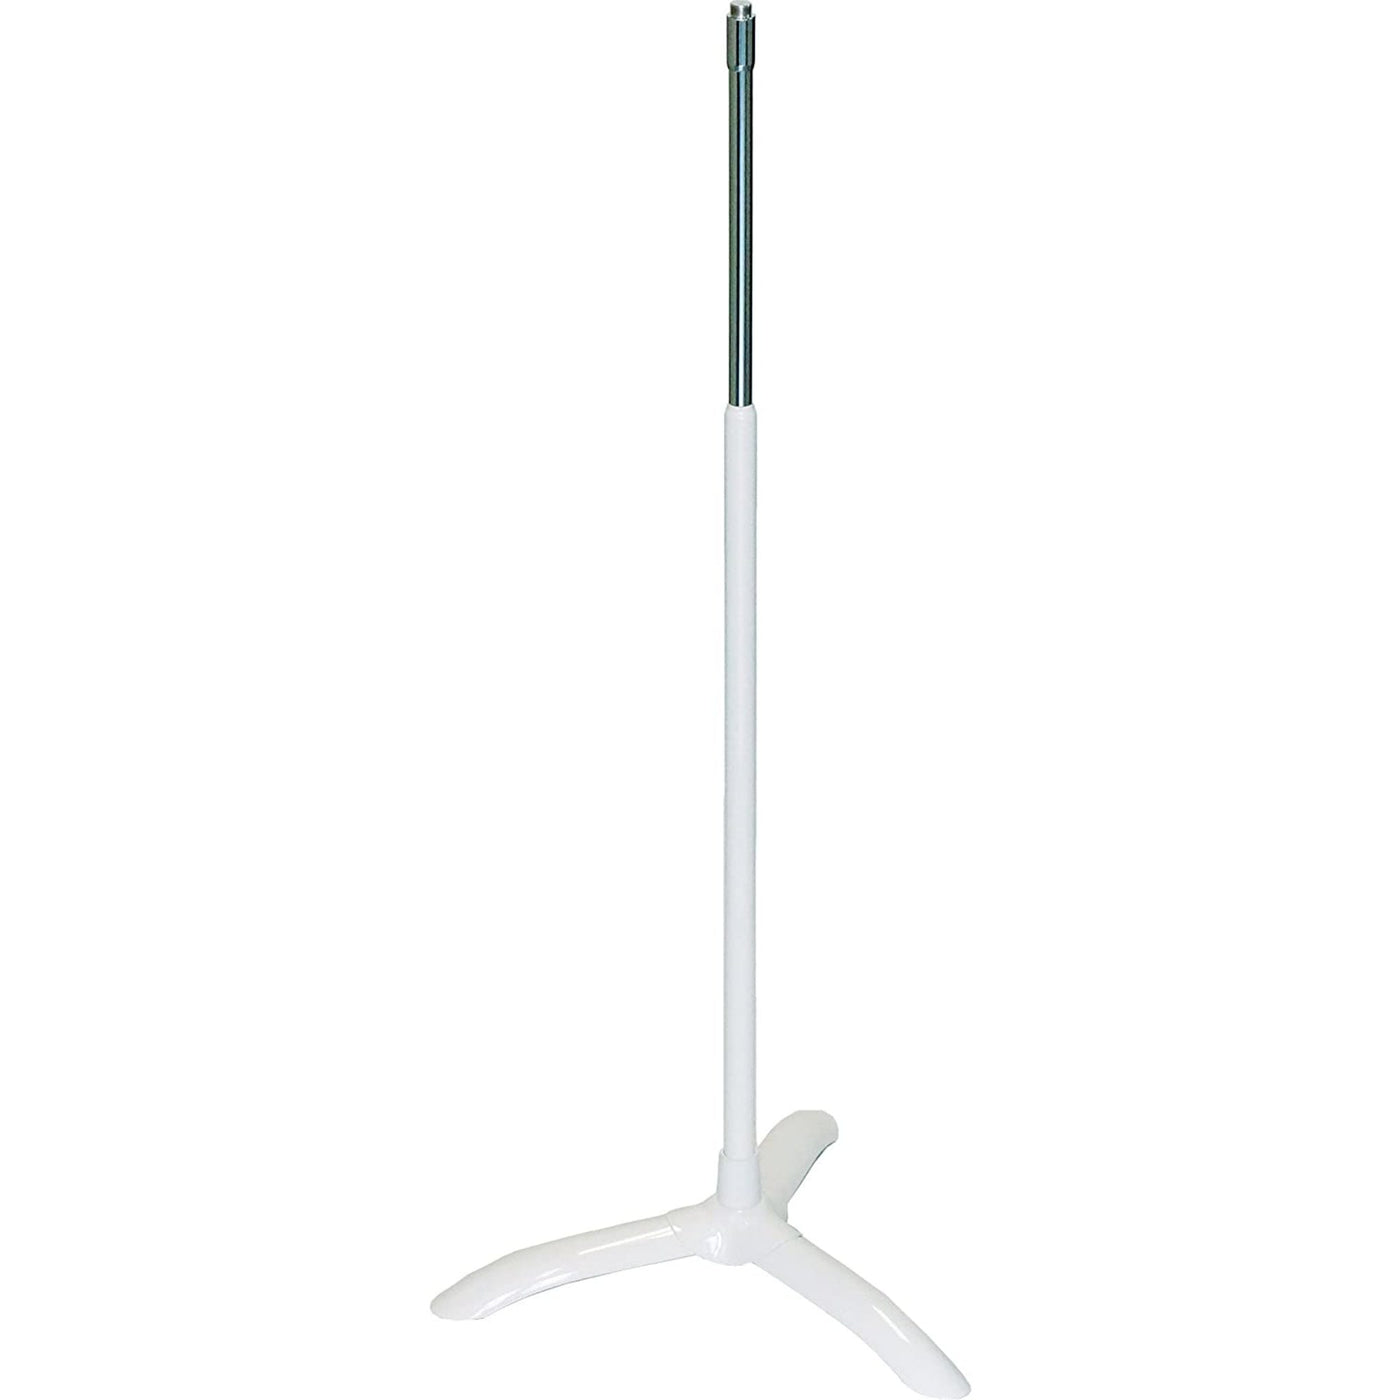 Manhasset Adjustable Height Universal Chorale Microphone Stand, White (3016WHI)